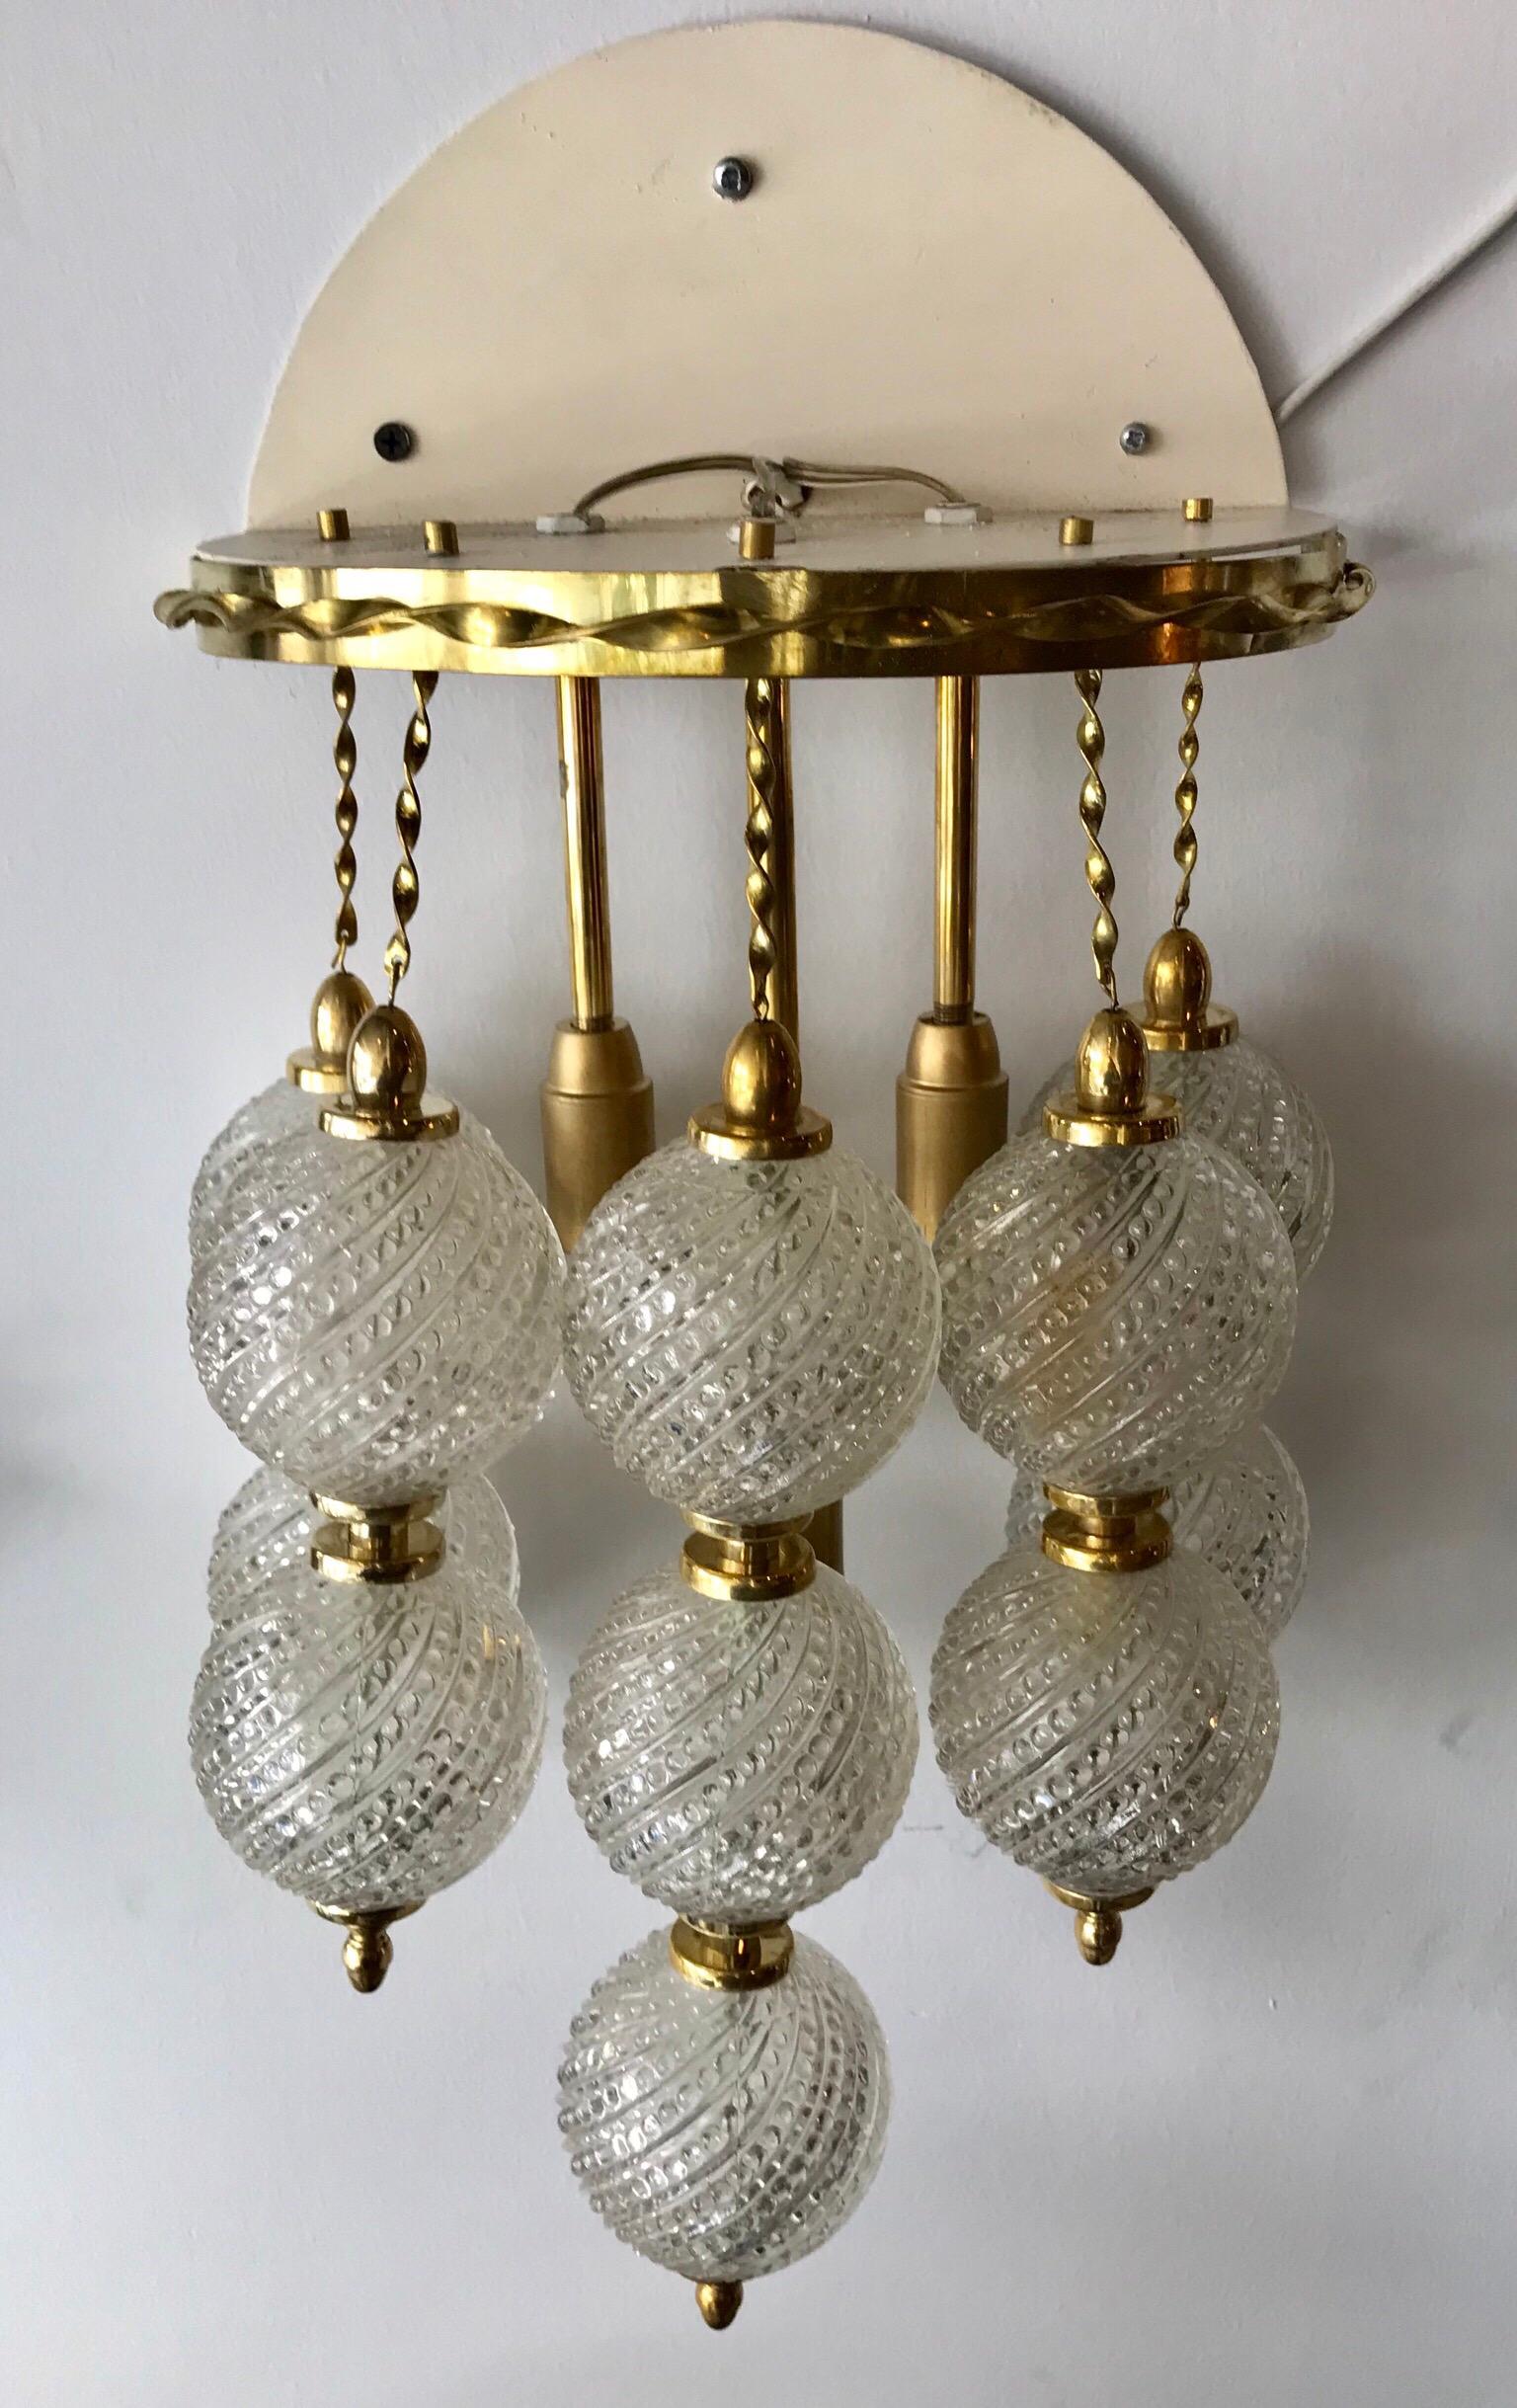 Pair of Midcentury Italian Brass and Venini Glass Hotel Bed Side Sconces 1